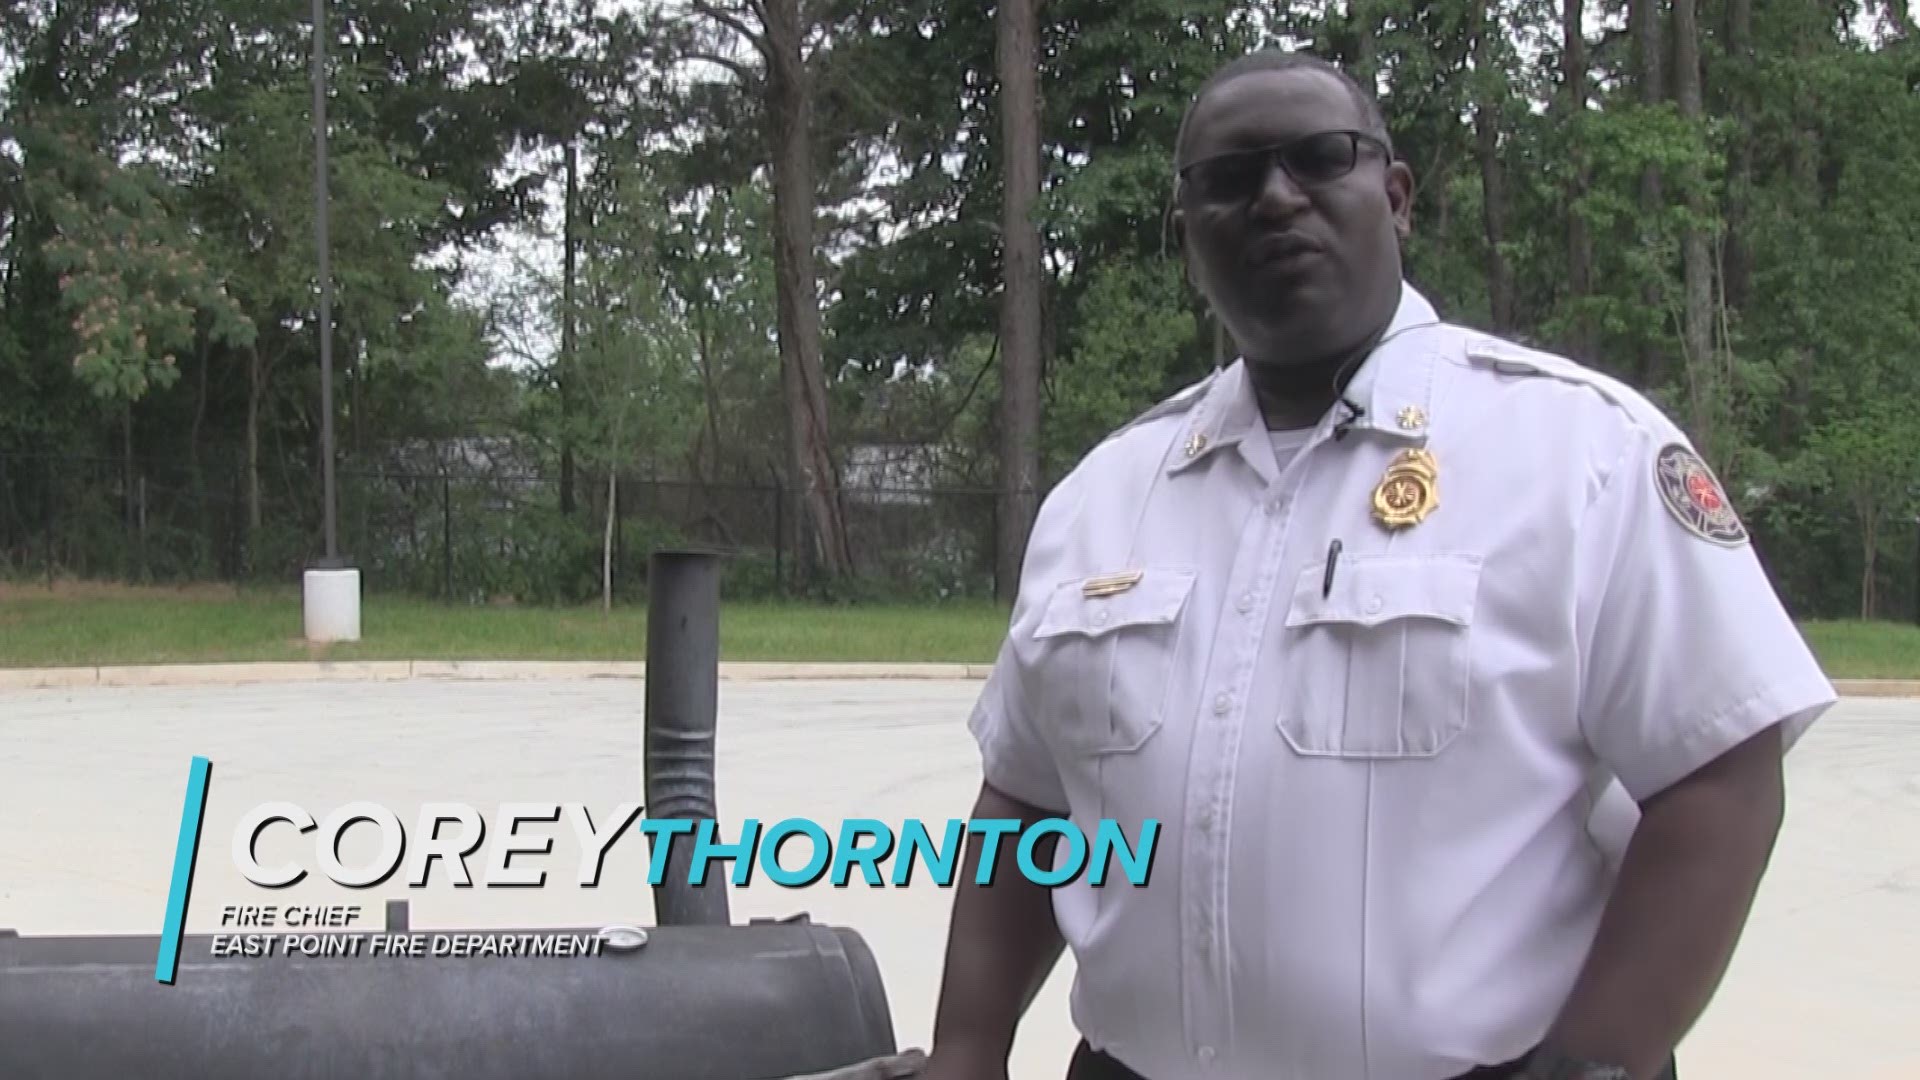 East Point Fire Chief Corey Thornton gives advice on how to stay safe this July 4th.